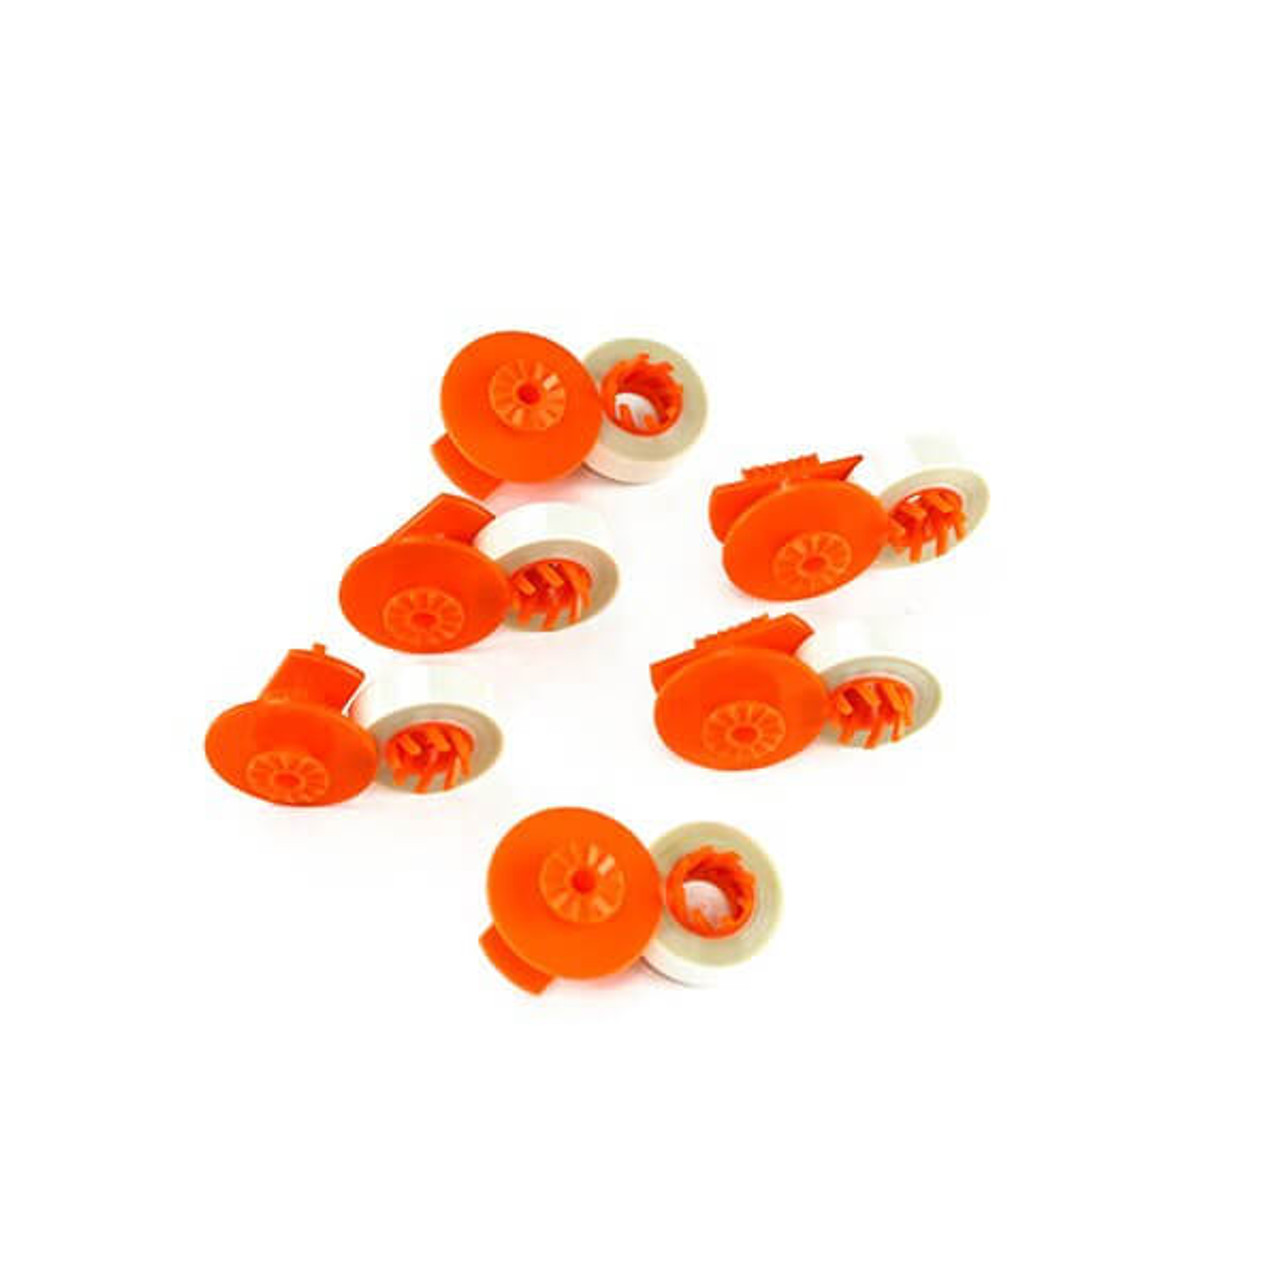 Brother 3015 Replacement Correction Tape | Monroe Systems